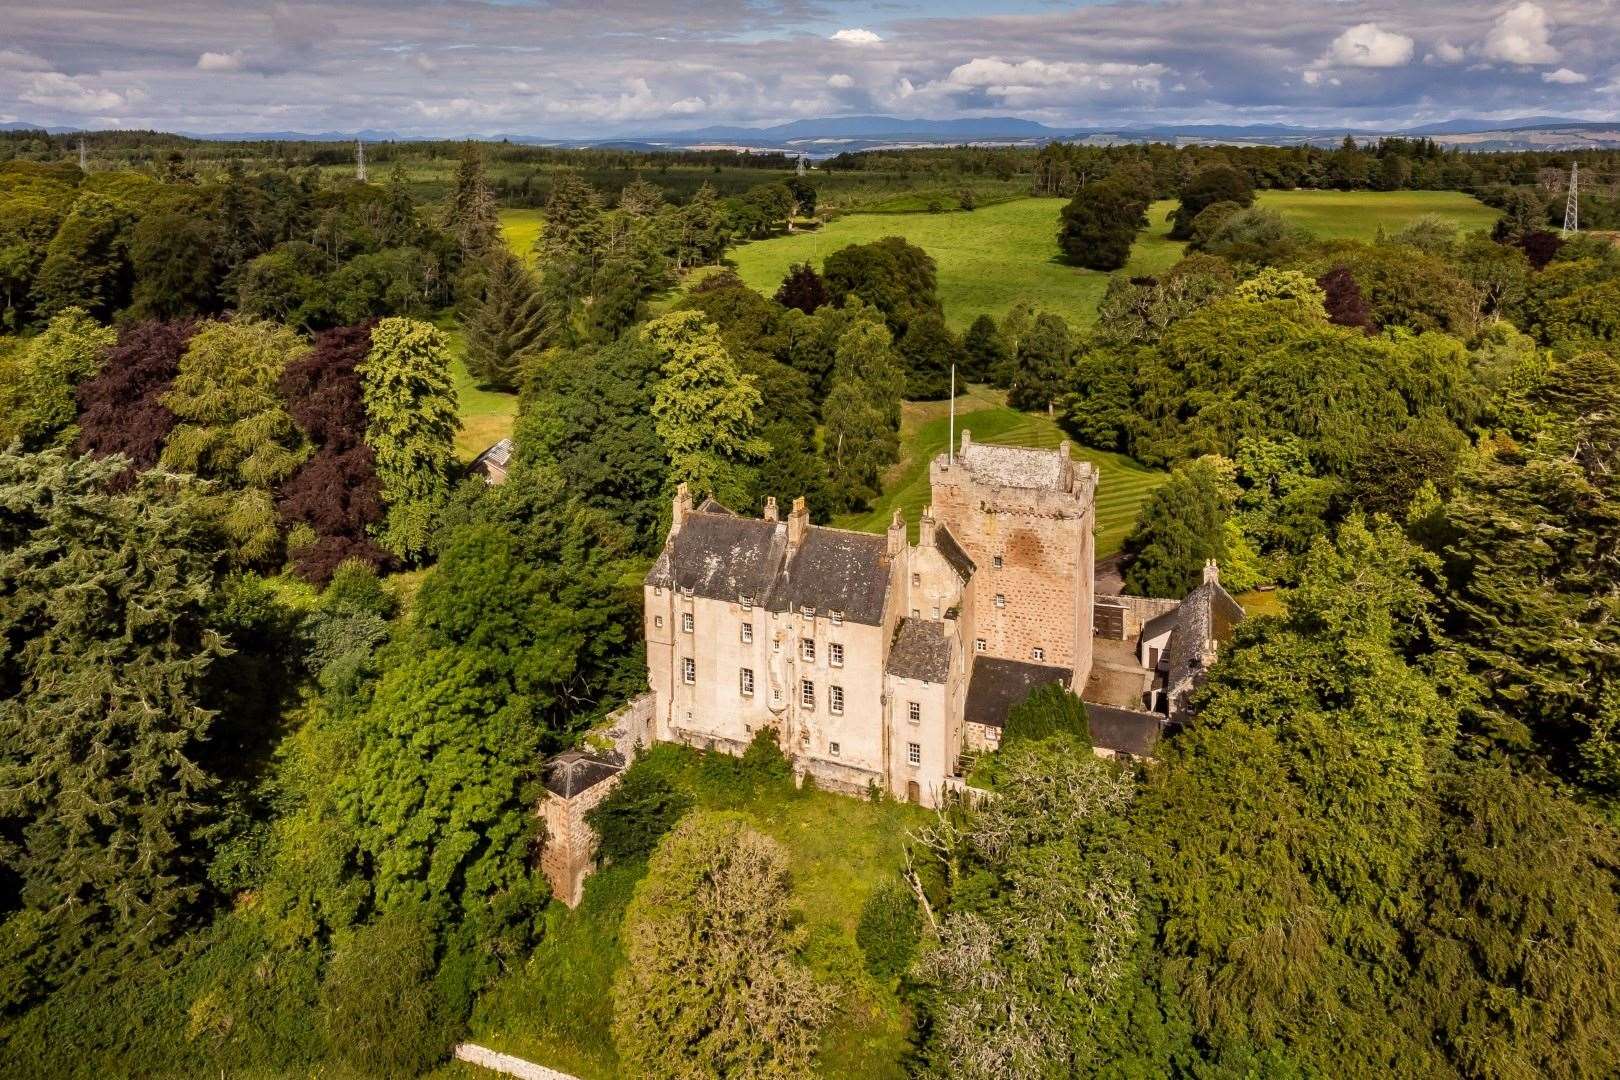 Kilravock Castle, which dates back to the 15th century, has played host to famous historical figures including Bonnie Prince Charlie.